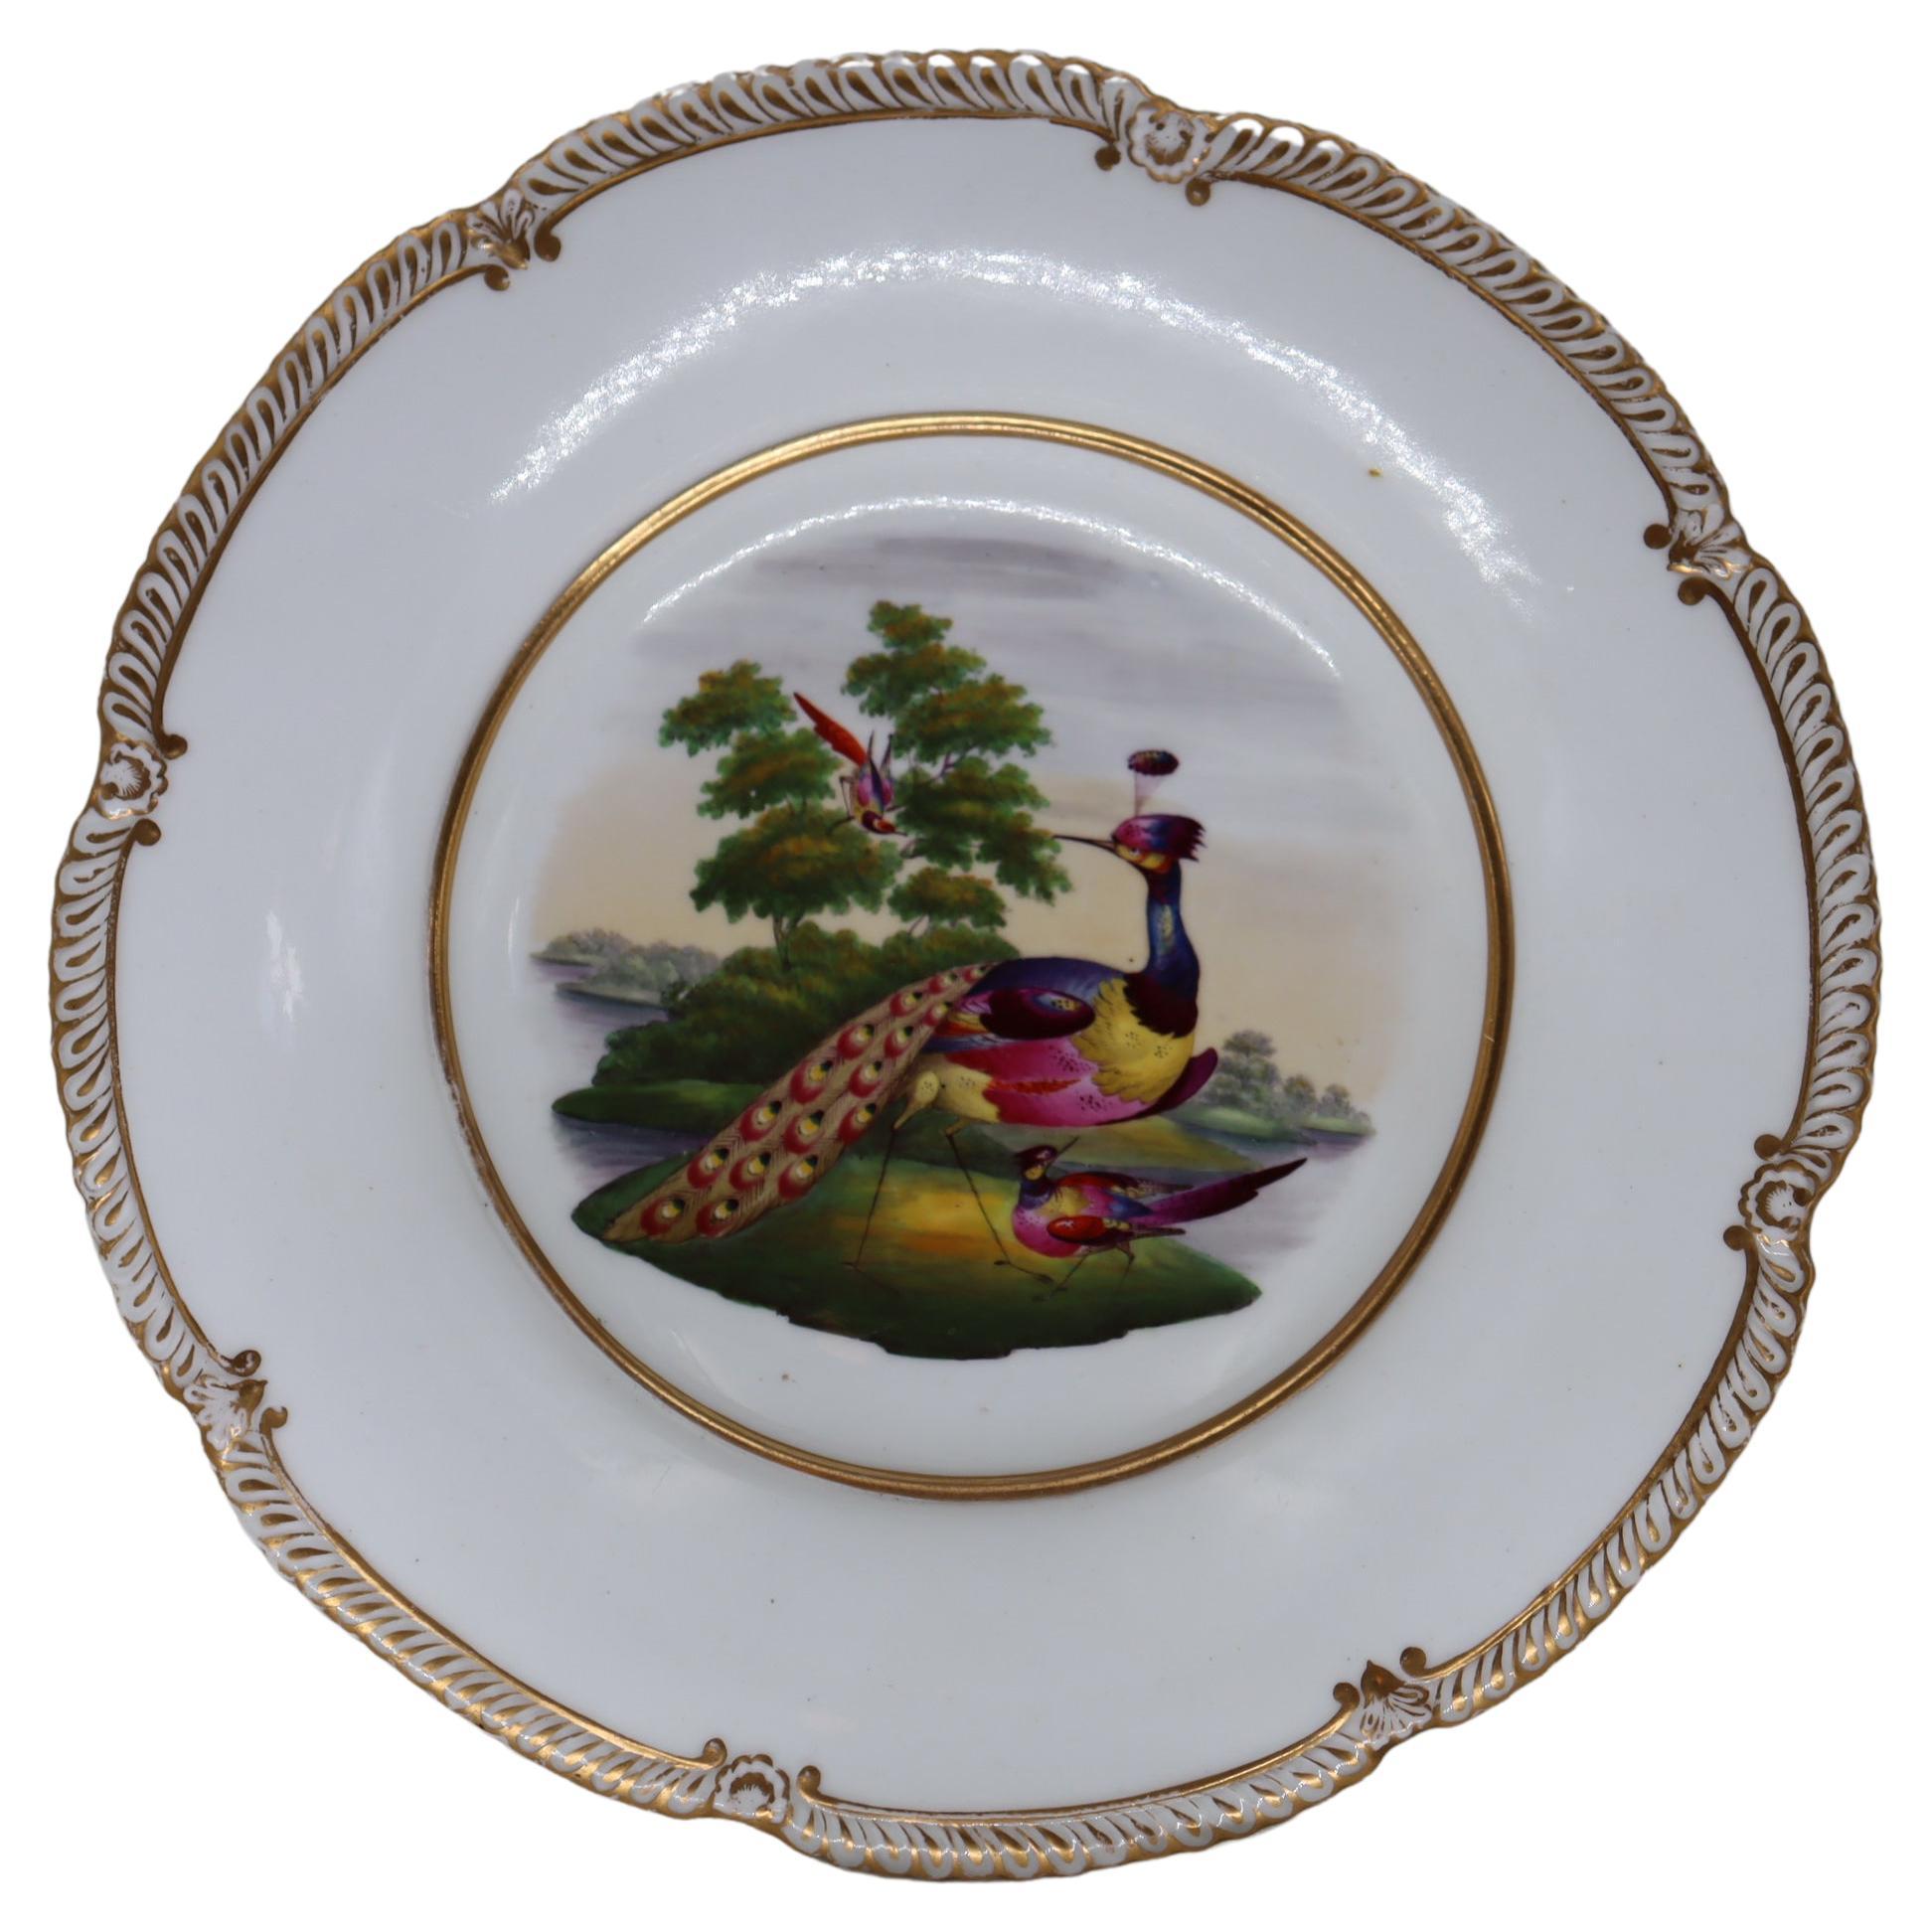 Chamberlain Worcester Porcelain Comport Decorated with Fancy Birds For Sale